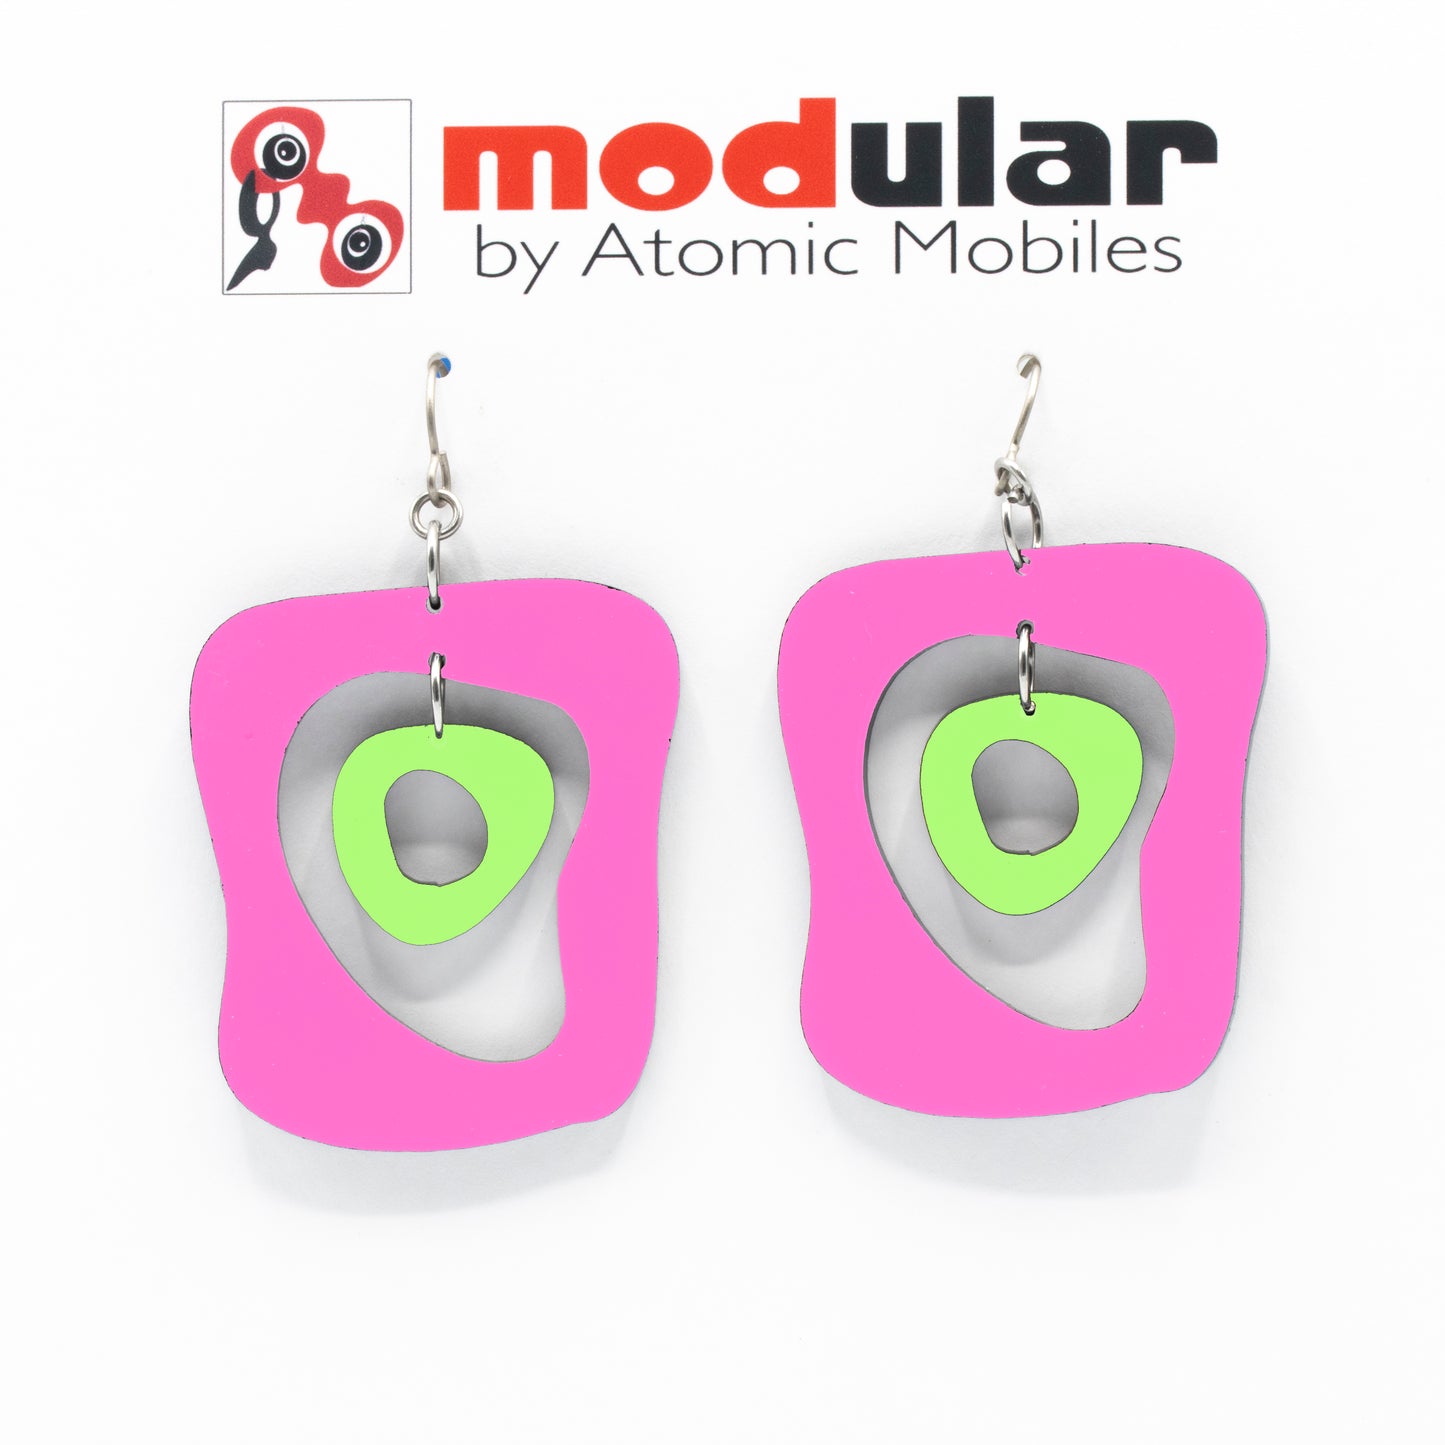 MODular Earrings - Mid Mod Statement Earrings in Hot Pink and Lime by AtomicMobiles.com - mid century inspired modern art dangle earrings